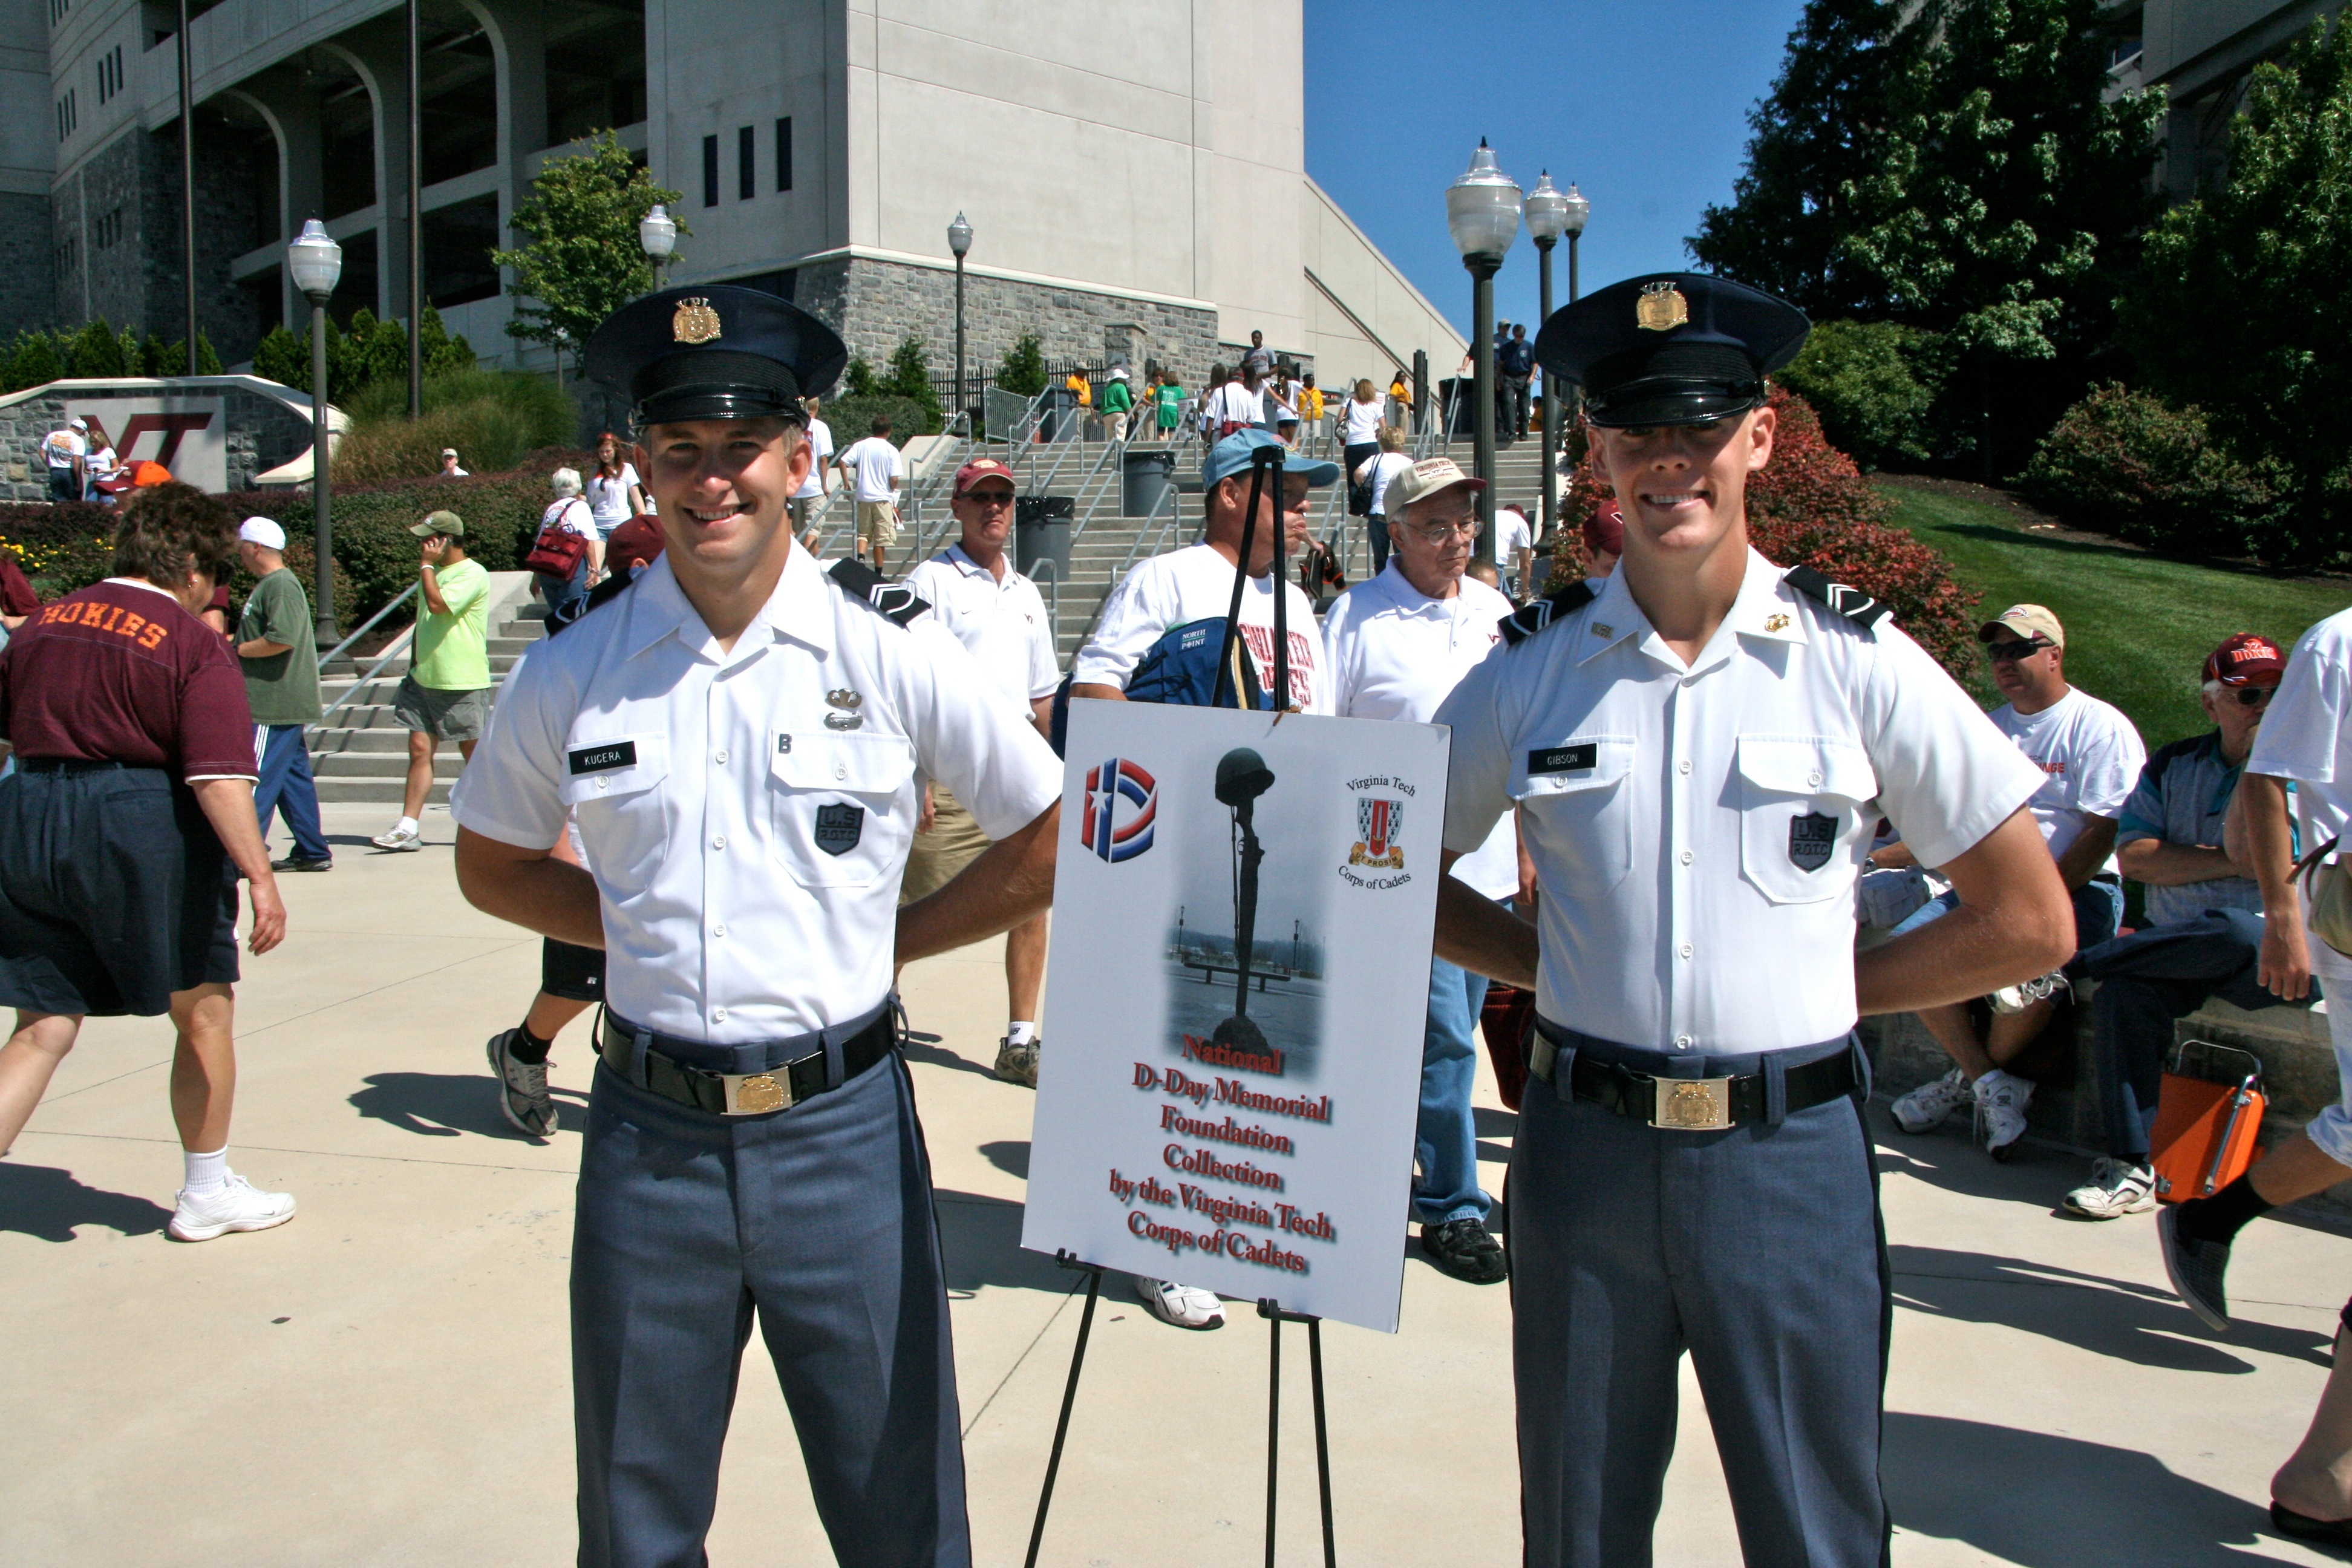 Cadet Adam Kucera of Deptford, N.J. (left), a junior majoring in spanish in the College of Liberal Arts and Human Sciences and Cadet Kelsey Gibson of Orlando, Fla., a senior majoring in political science in the College of Liberal Arts and Human Sciences collect for the National D-Day Memorial at the Virginia Tech versus Marshall game.